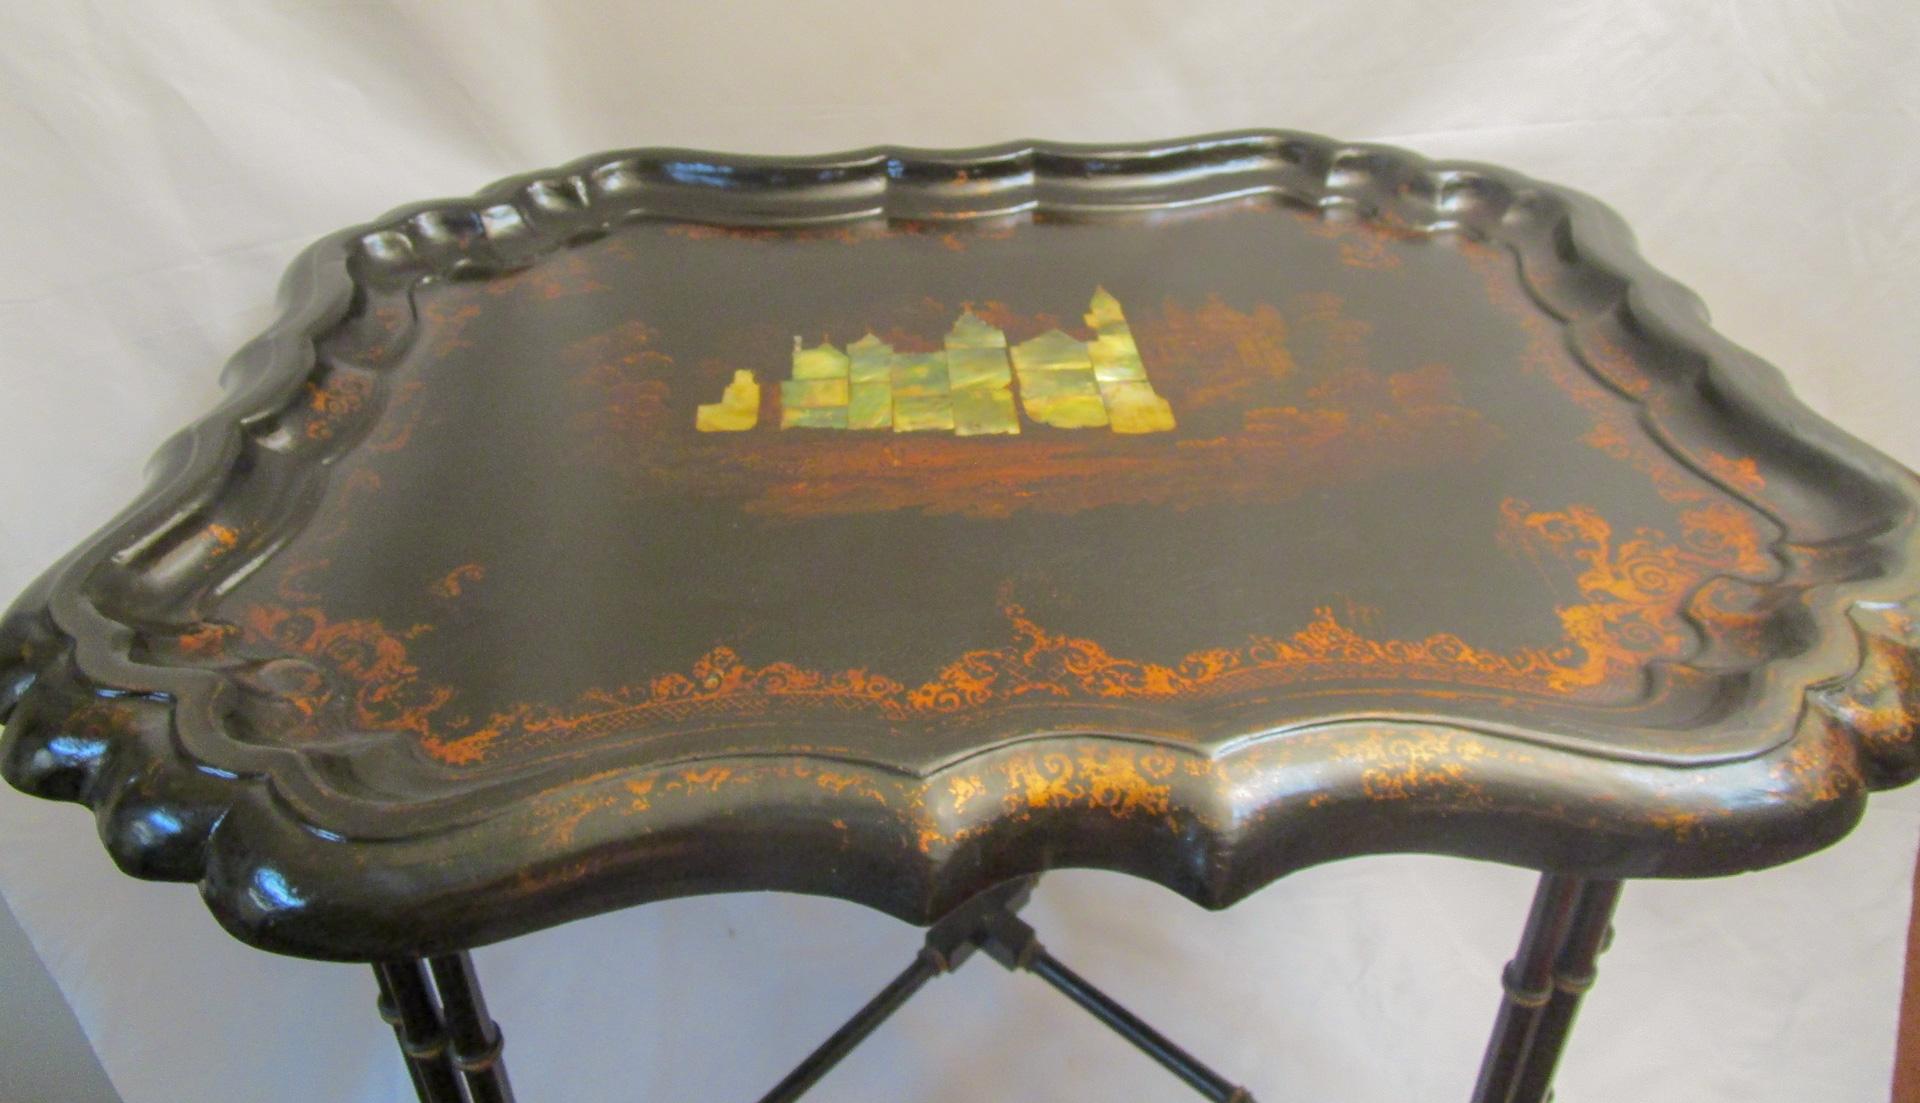 A large and rare Papier-mâché tray table with intricate view of castle in mother of pearl inlay on the top set in a serpentine shaped surround with gilded foliate borders and gold gilt border around the castle. Twelve graceful legs in sets of three